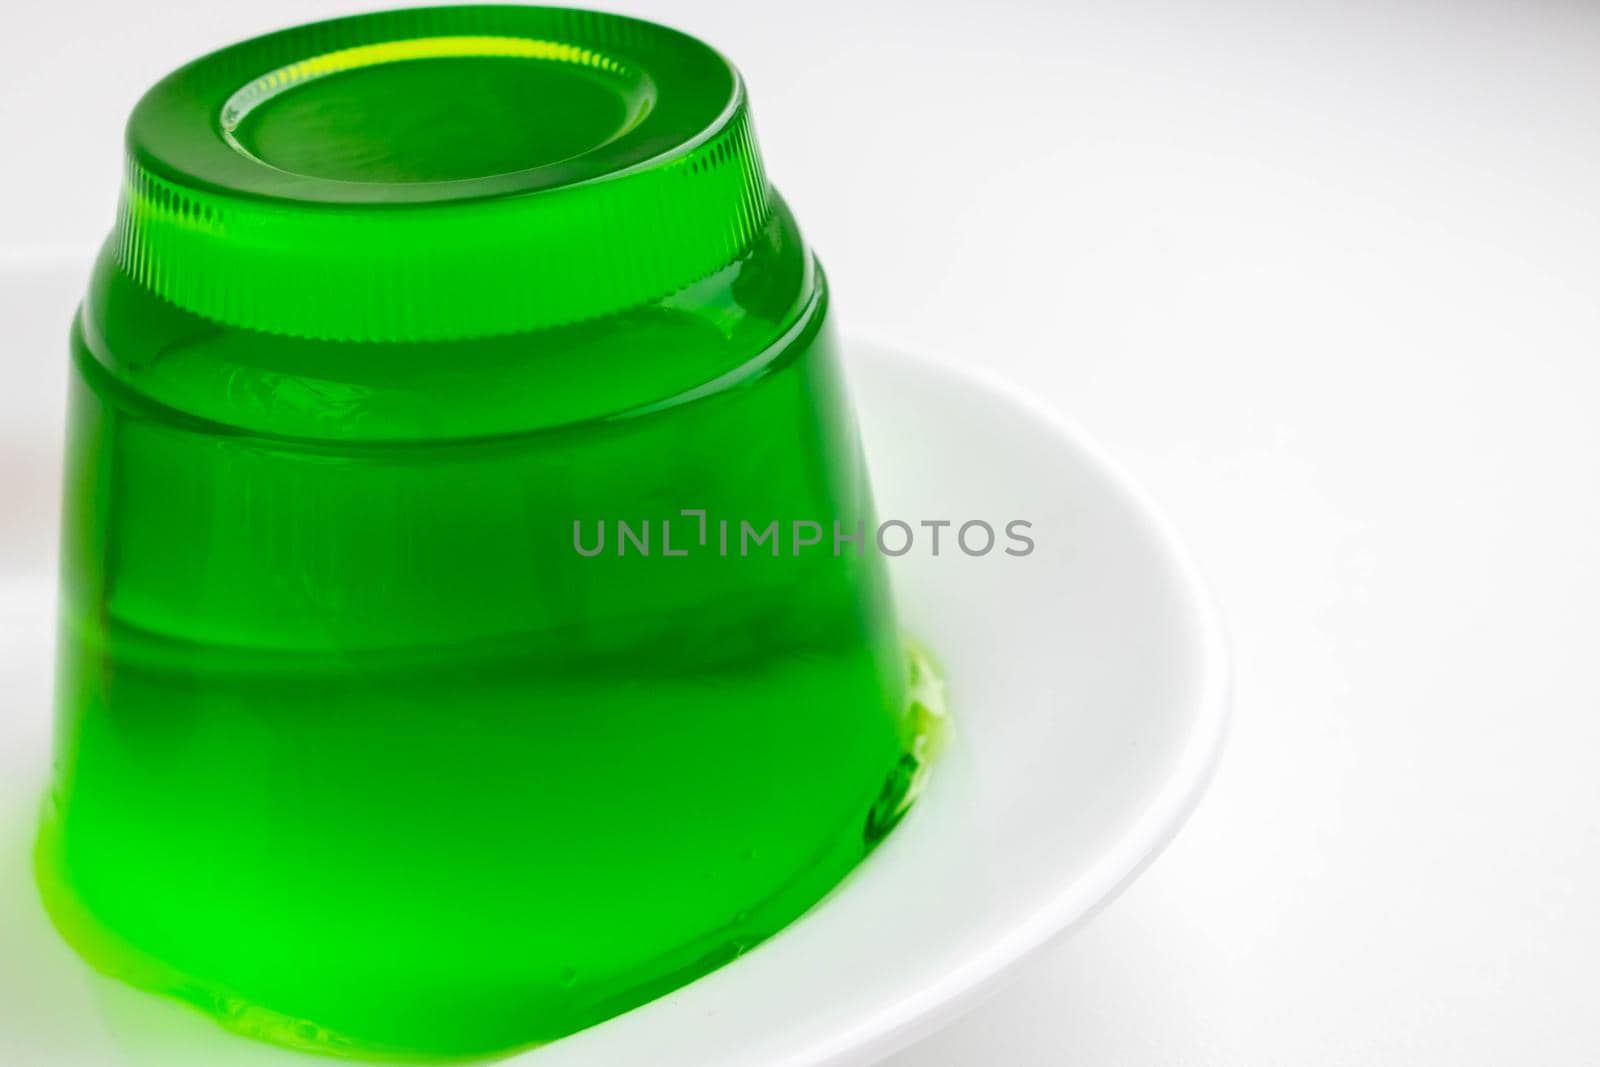 White plate with green kiwi jelly on a white background by lapushka62